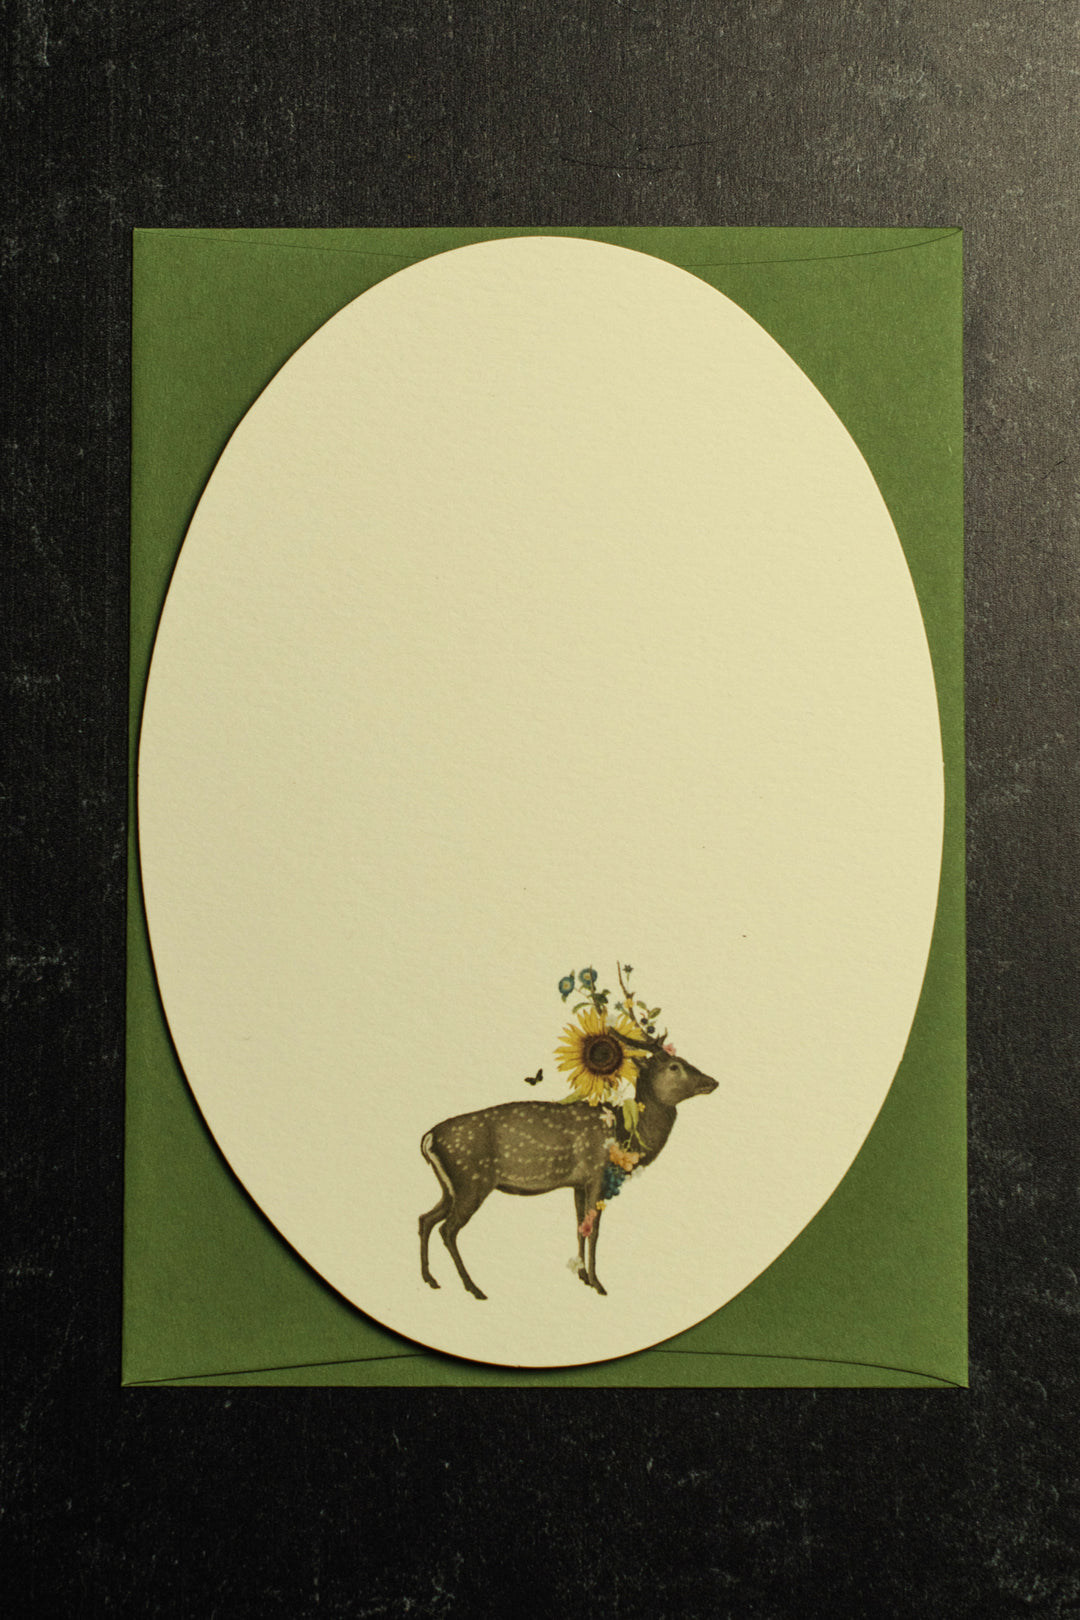 Open Sea "Stag with Flower" Card